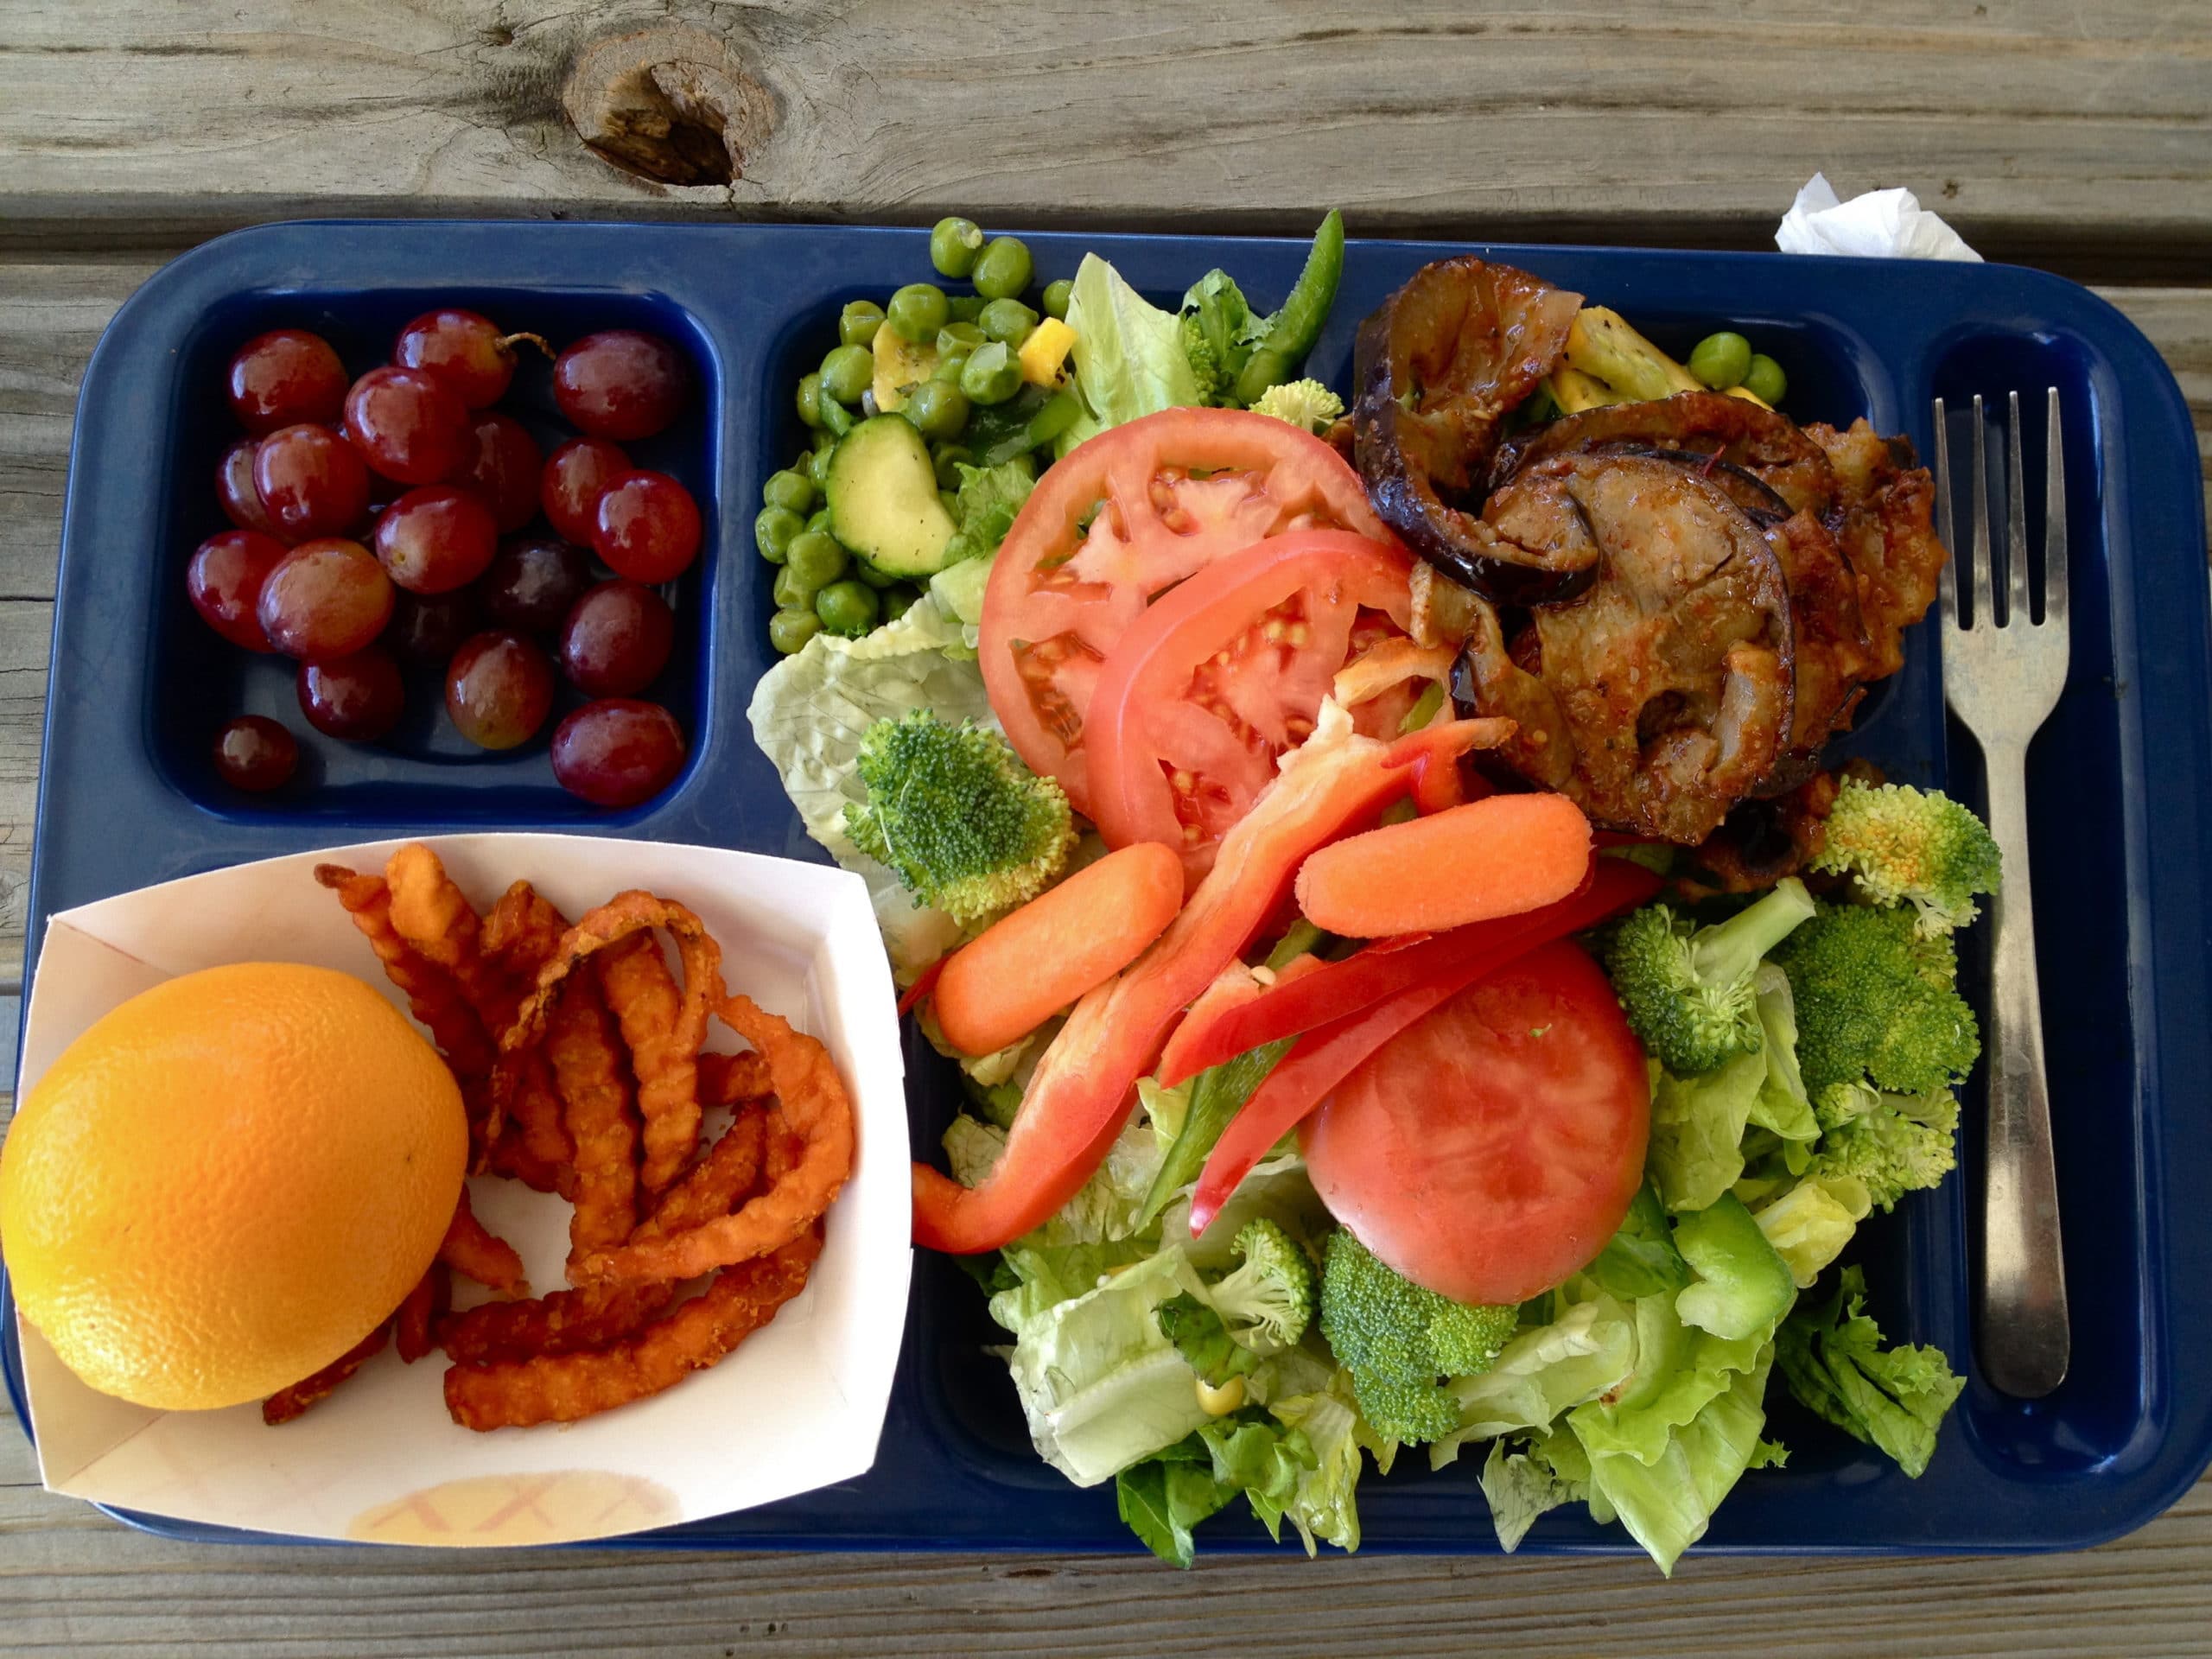 A lunch tray in Arkansas featuring an array of school food items, including fresh broccoli, purple grapes, sweet potato fries, and an orange.